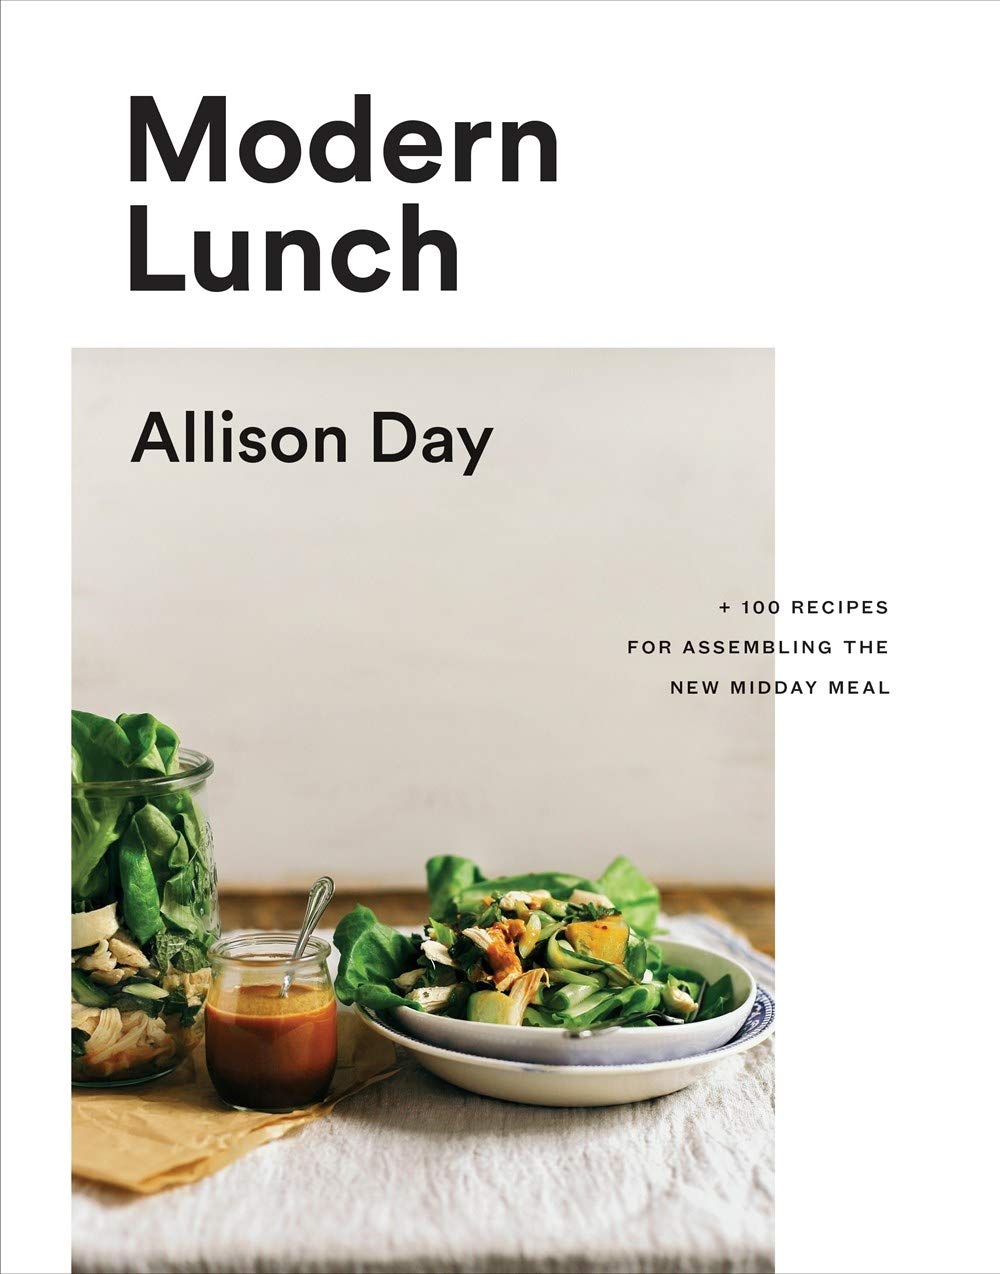 Modern Lunch +100 Recipes for Assembling the Midday Meal by Allison Day